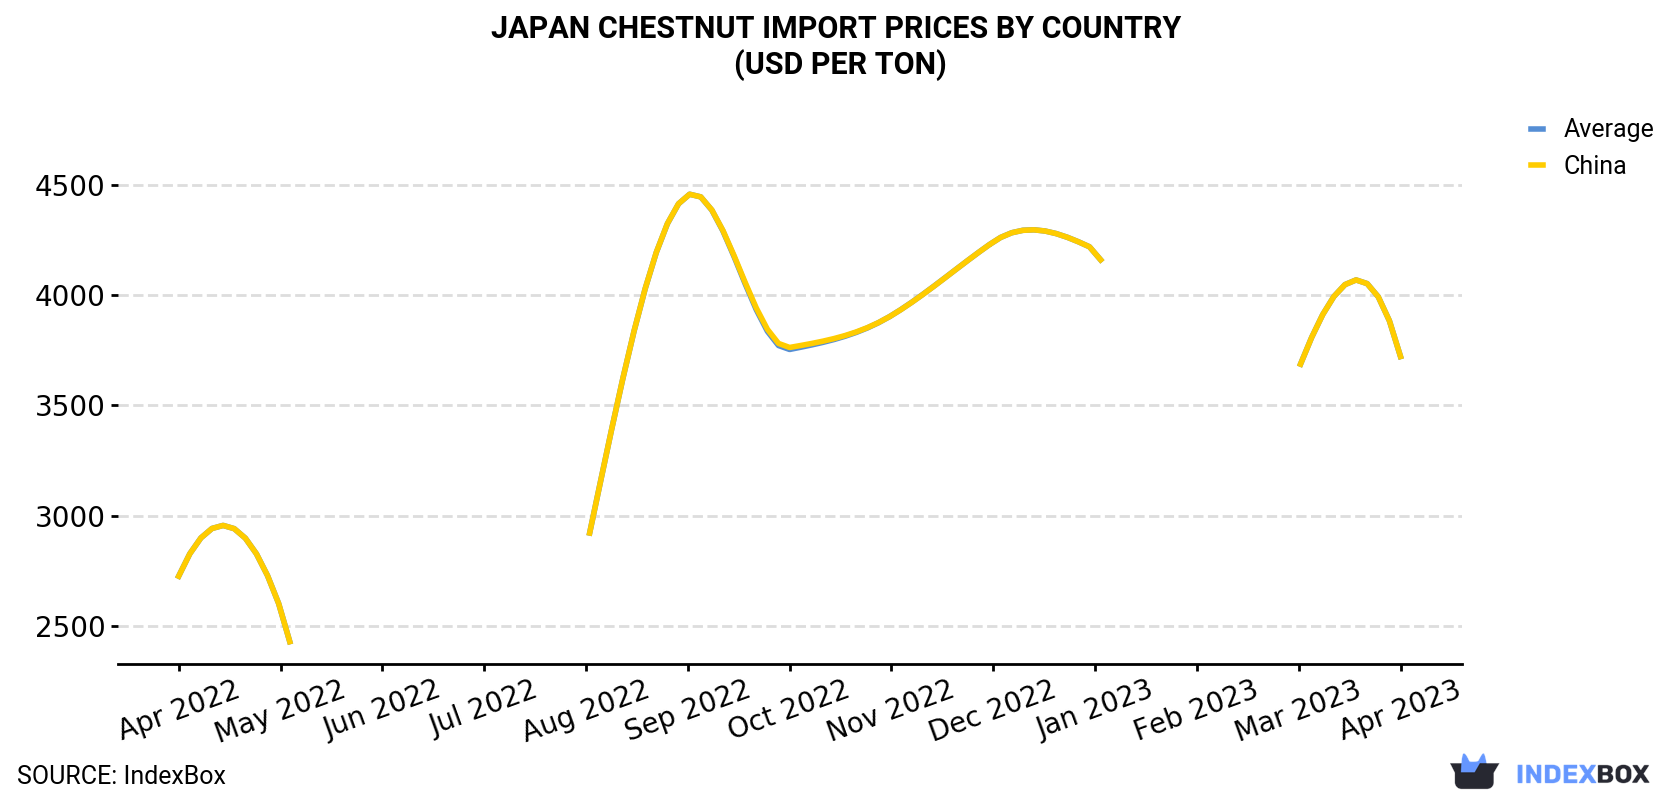 Japan Chestnut Import Prices By Country (USD Per Ton)